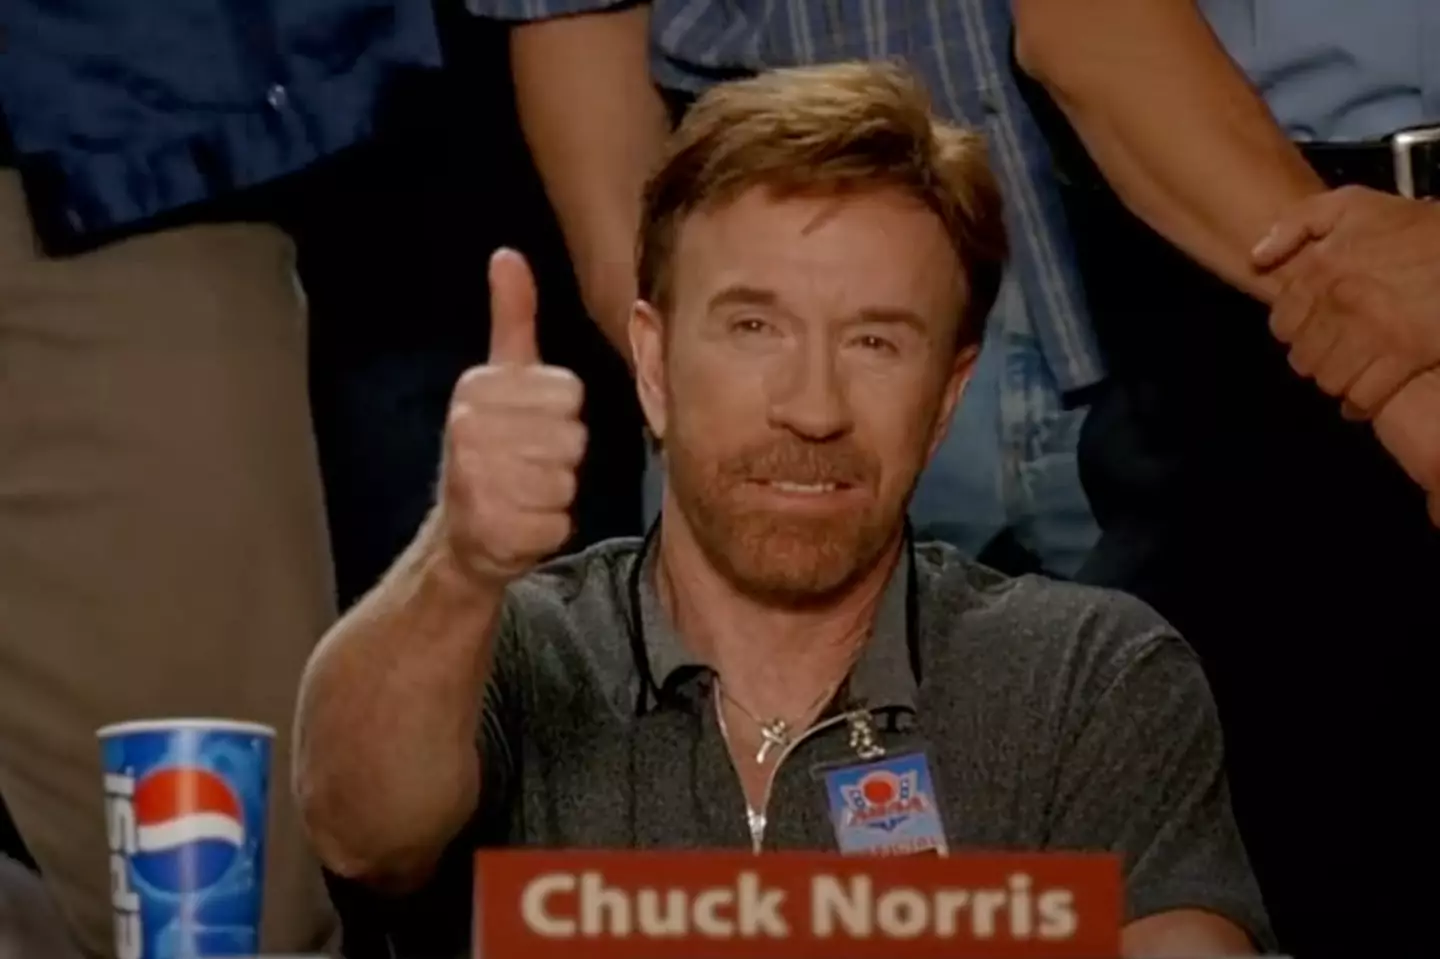 Chuck Norris had a small but powerful cameo in the 2004 film.